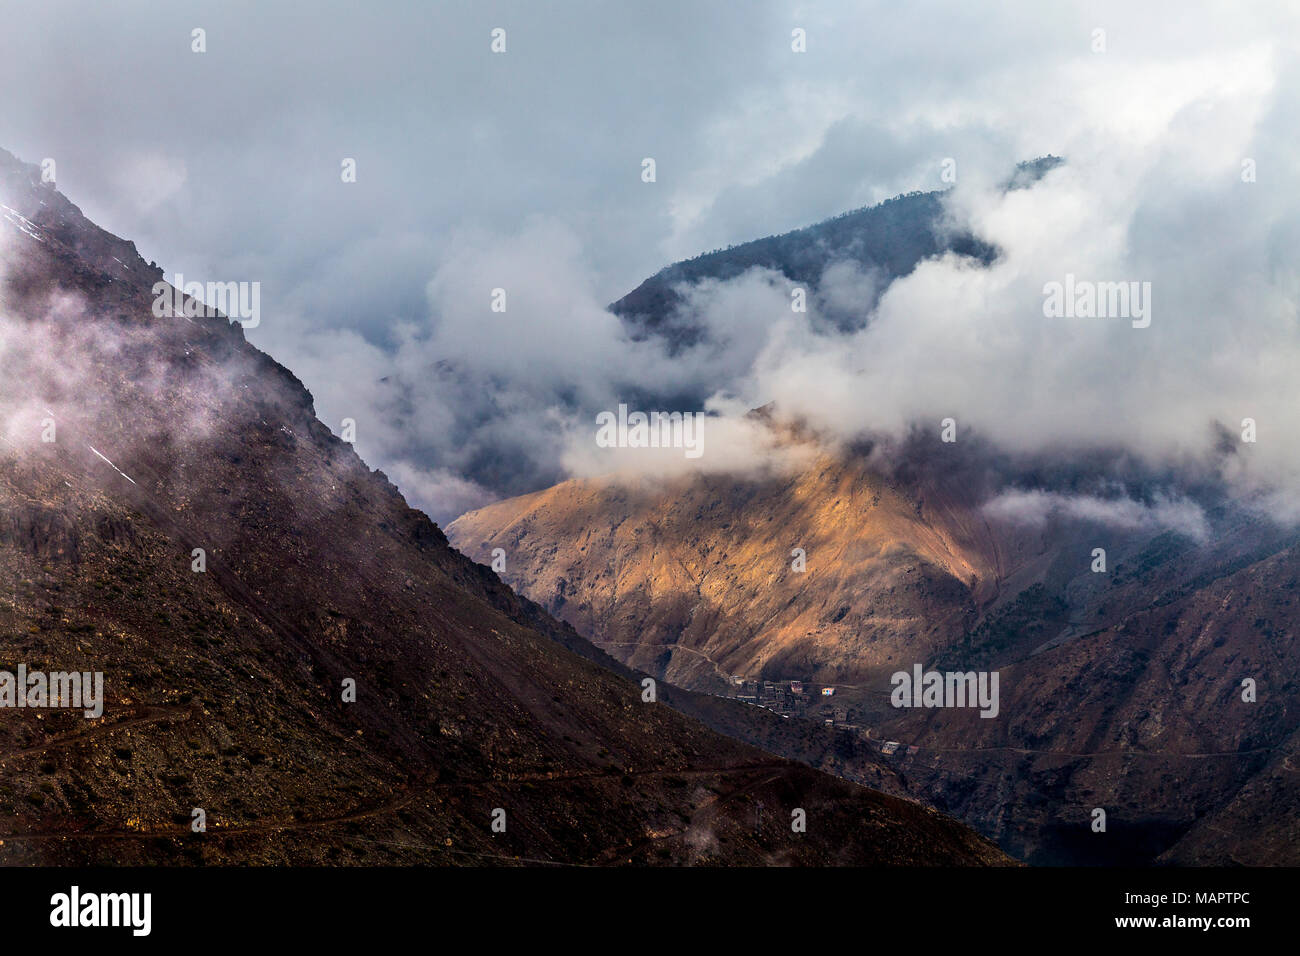 Clouds between peaks in the High Atlas Mountains near Imlil, Morocco Stock Photo